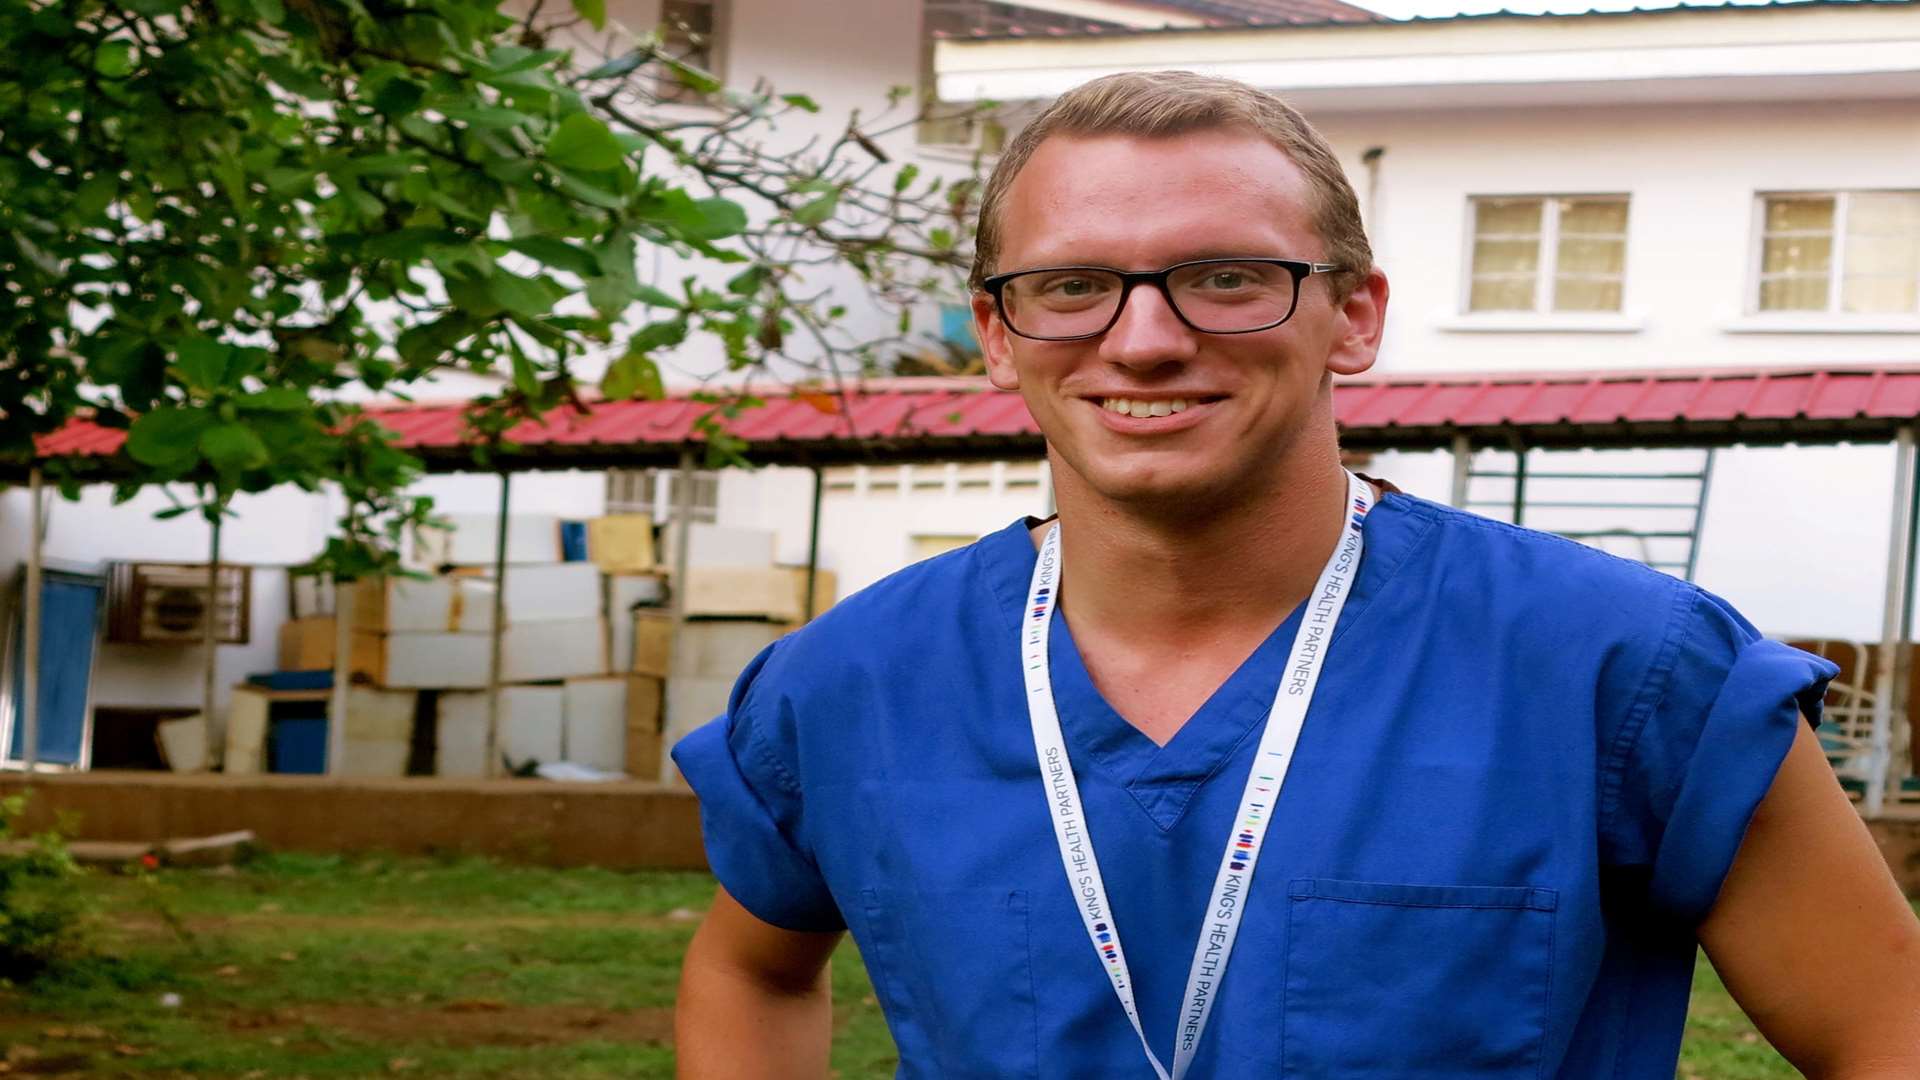 Andy Hall has travelled to Sierra Leone to help an Ebola response unit